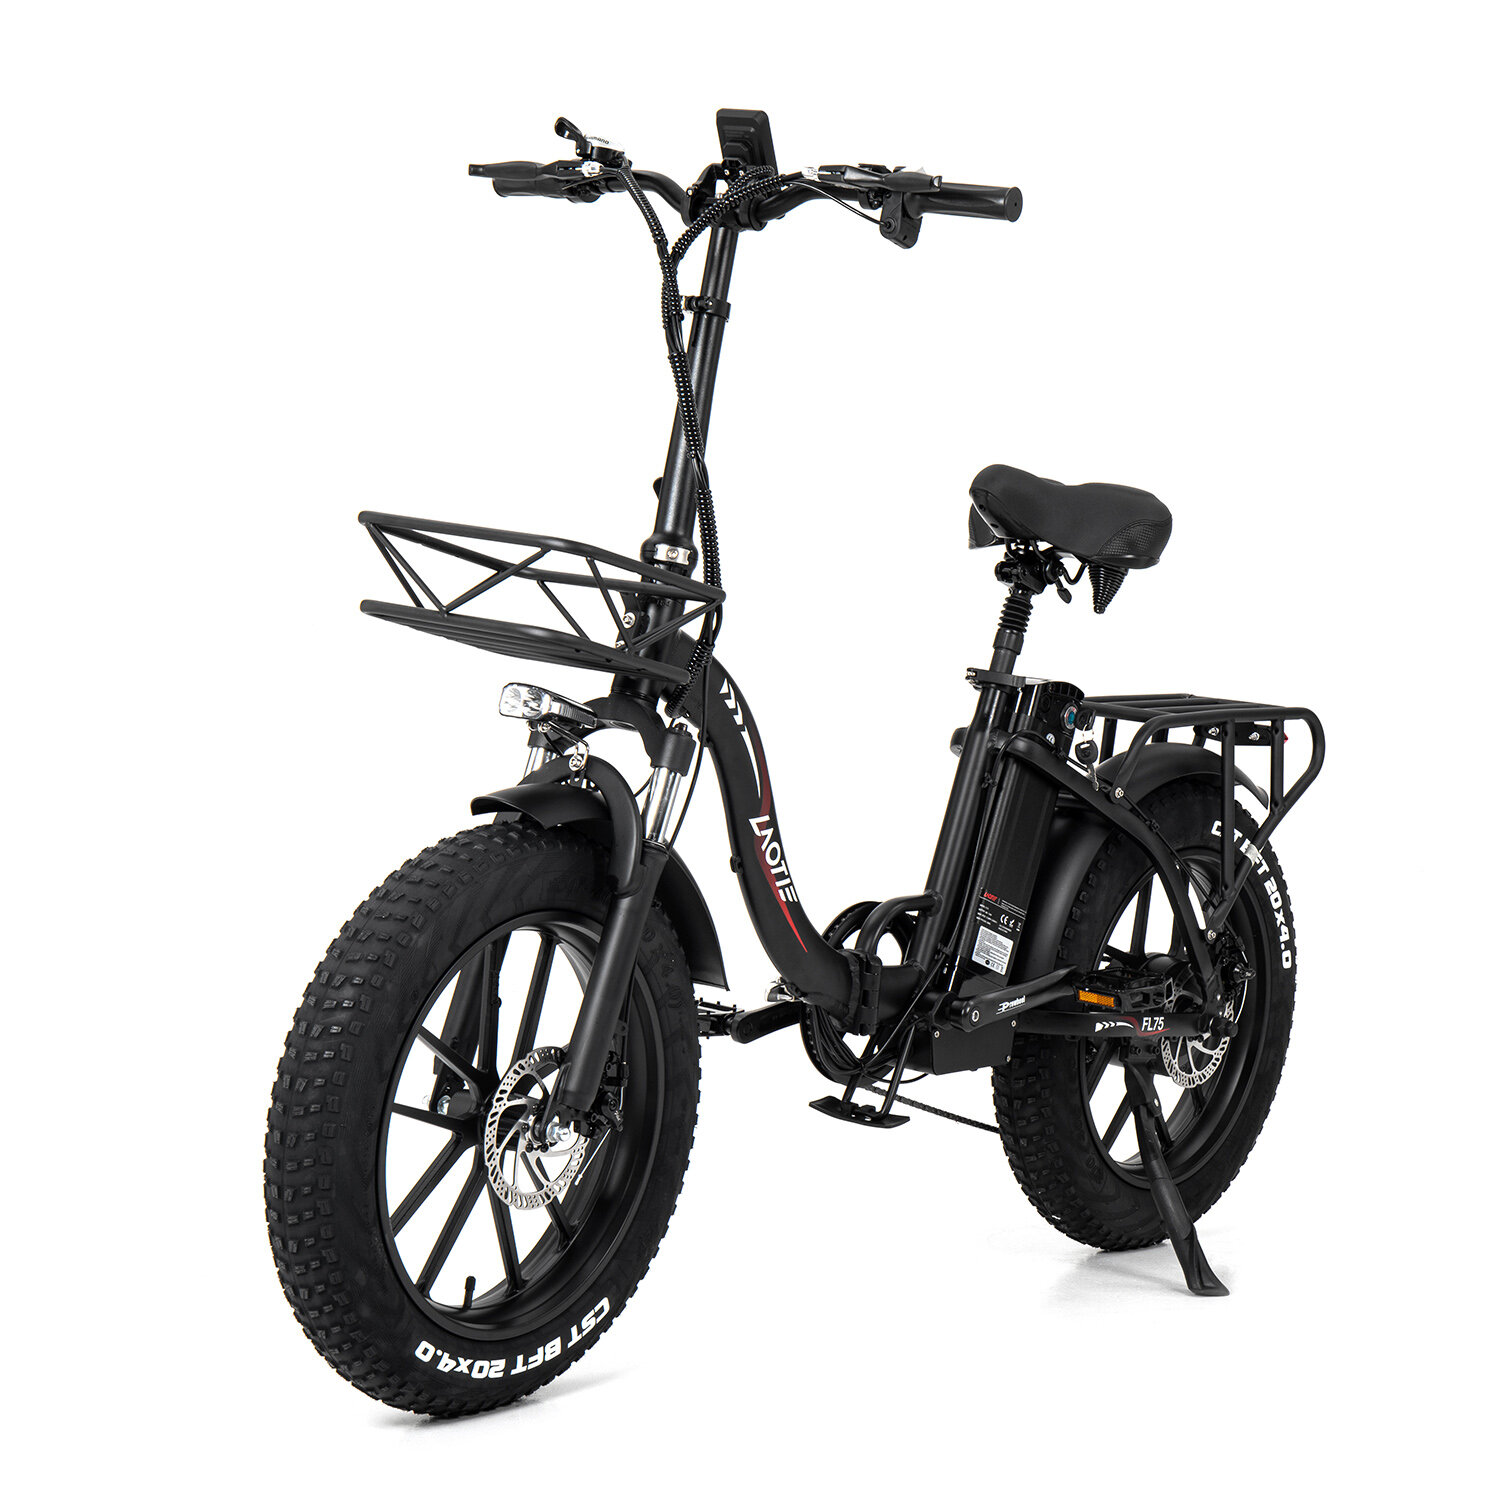 Image of LAOTIE® FL75 7S 750W 48V 15Ah 20x40in Fat Tire Folding Electric Moped Bicycle 70-110km Mileage 200KG Max Load Electric